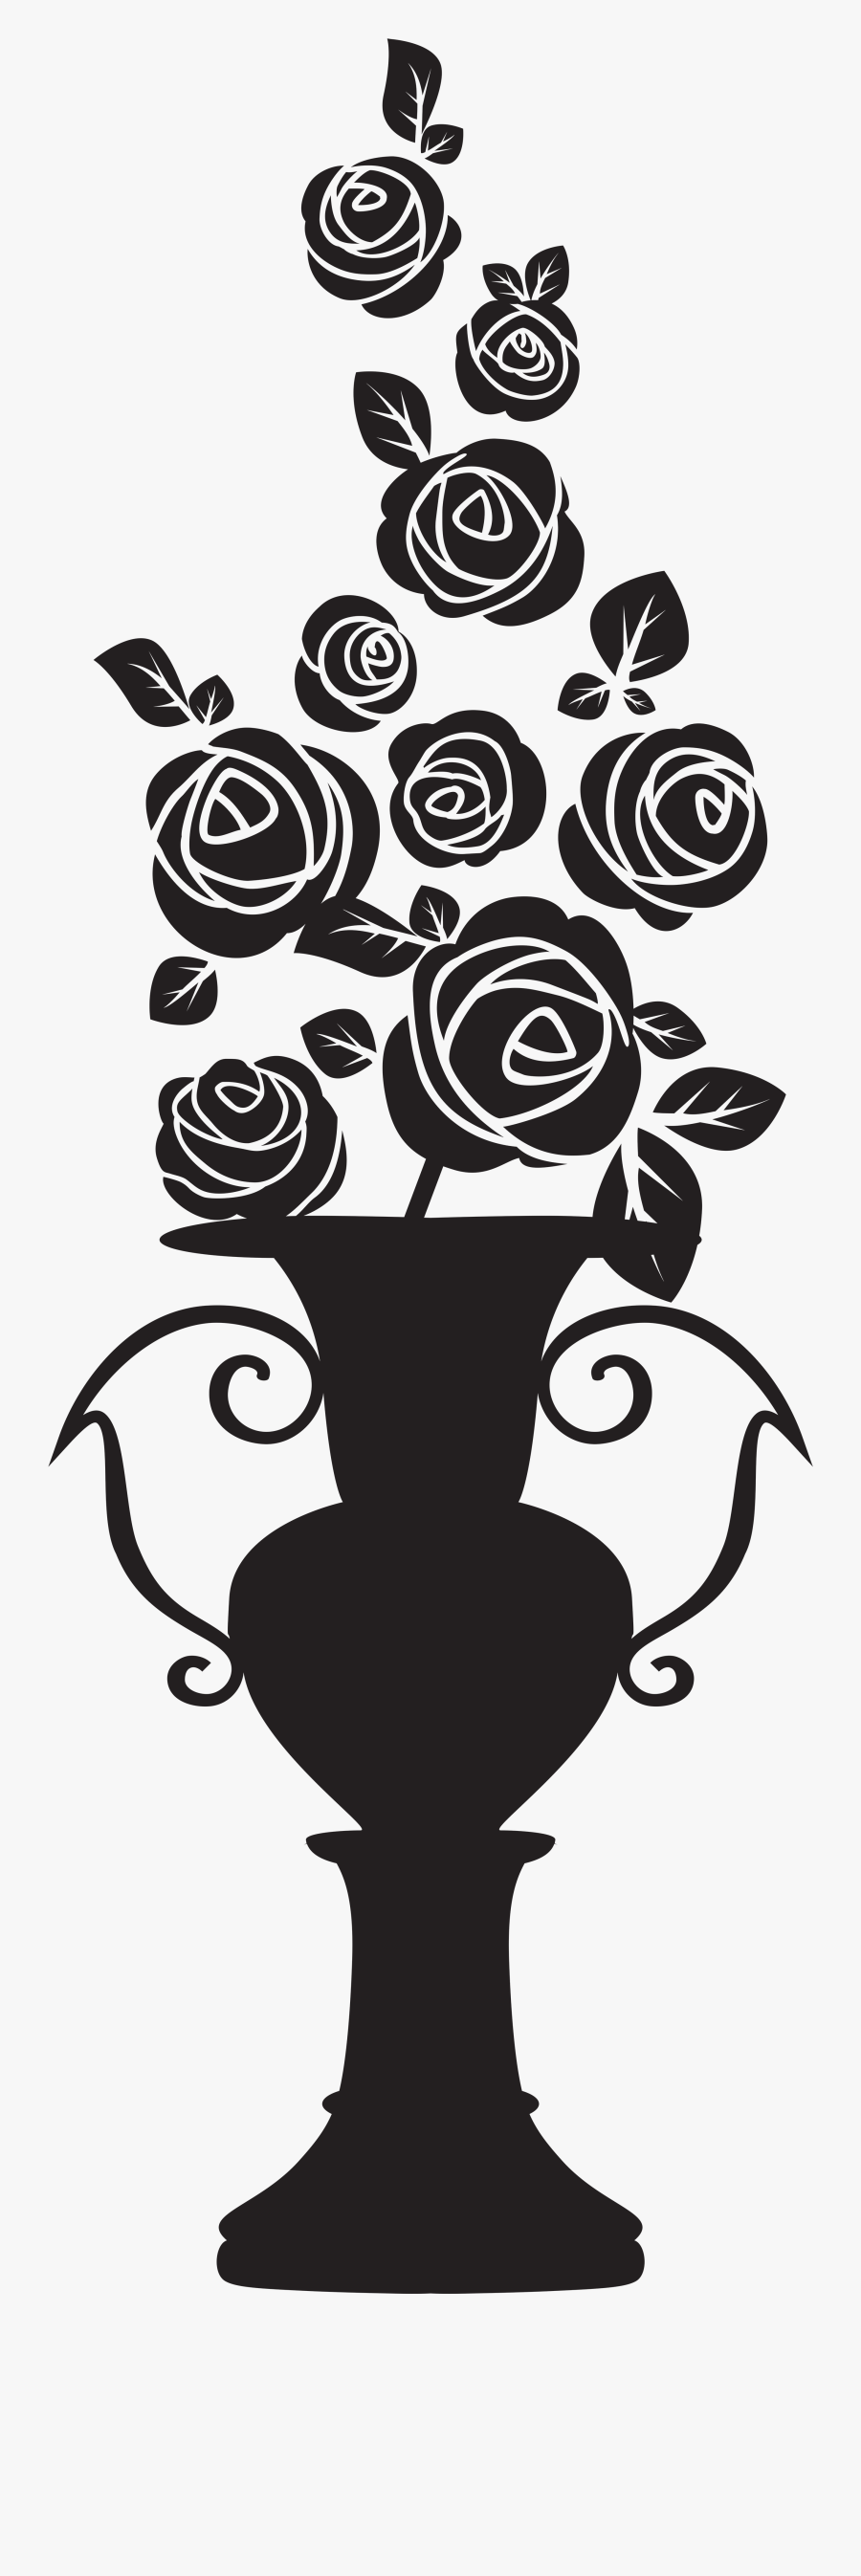 Vase With Roses Png - Happy Hour Fundraiser Invite, Transparent Clipart